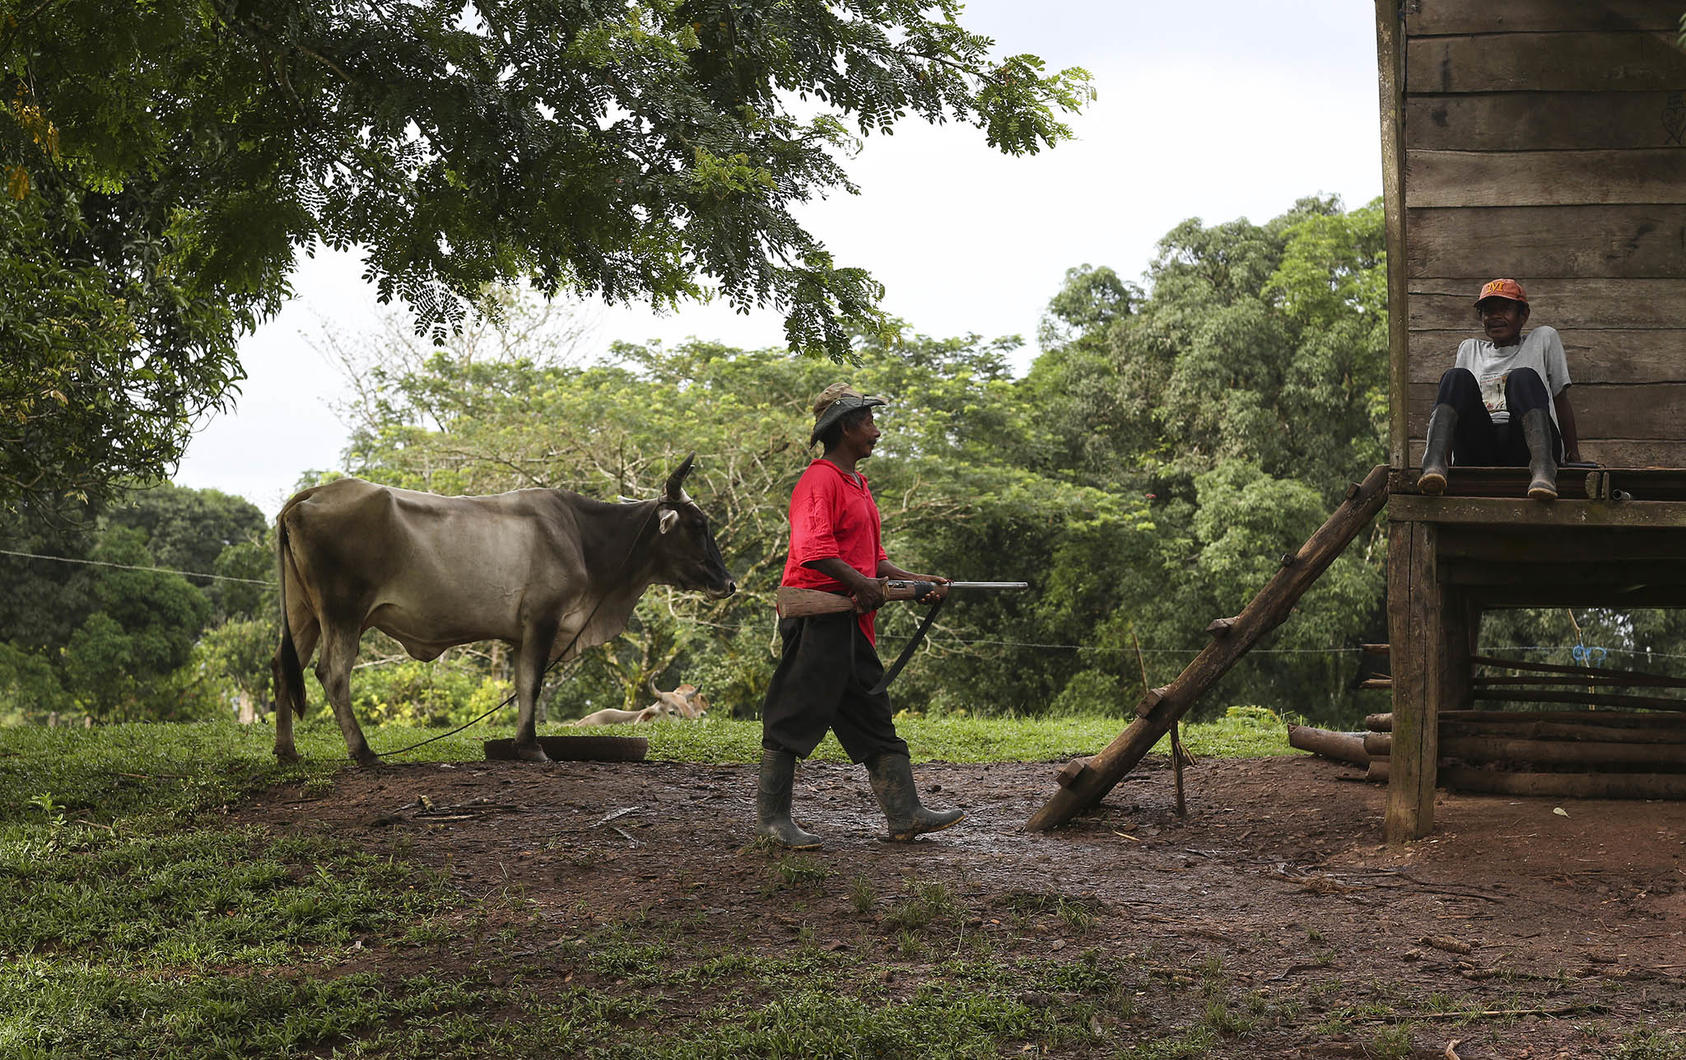 Men of Nicaragua’s Miskito people guard their homes in Nicaragua, one of many countries where Indigenous groups face violence, including attacks by powerful interests trying to exploit their biodiverse homelands. (Oswaldo Rivas/The New York Times)